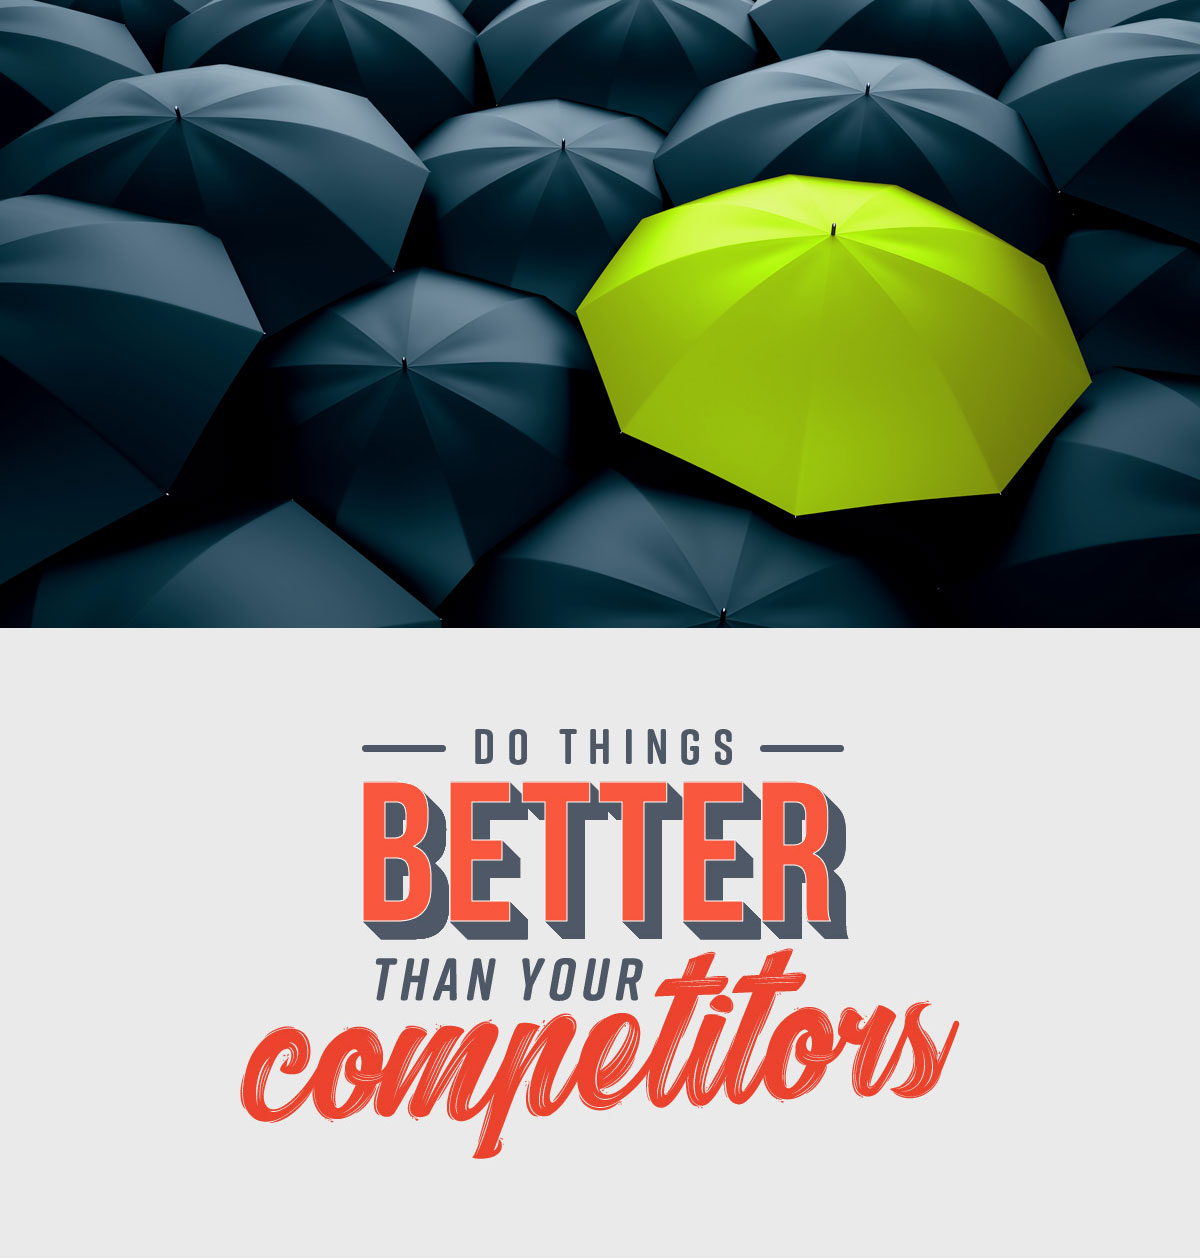 Do things better than your competitors and stand-out from the crowd